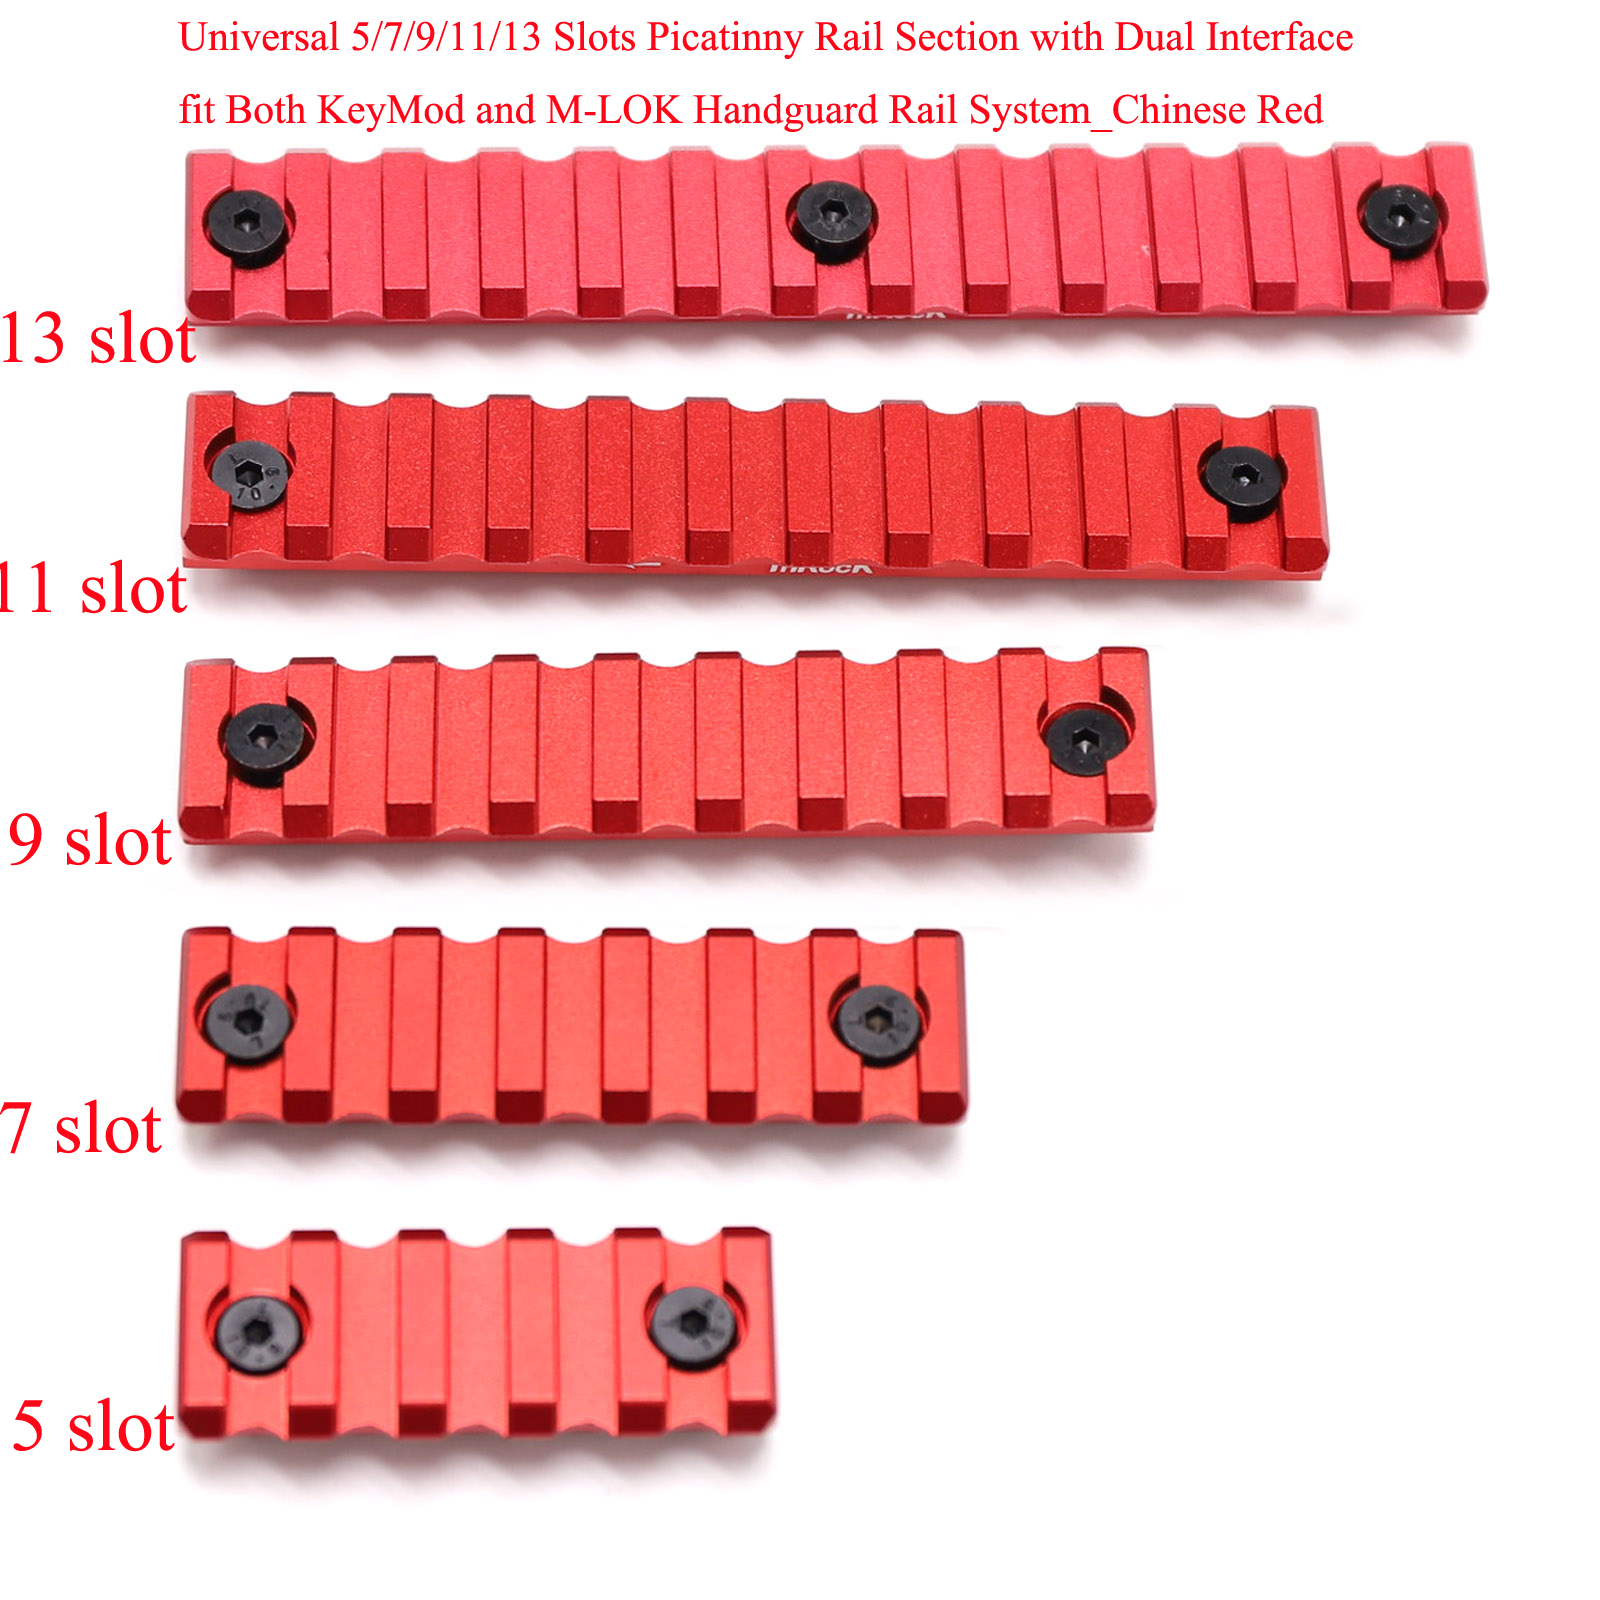 

Universal 5/7/9/11/13 Slots Picatinny Rail Section with Dual Interface Fit Both Keymod and M-LOK handguard Rail System_Chinese Red Color